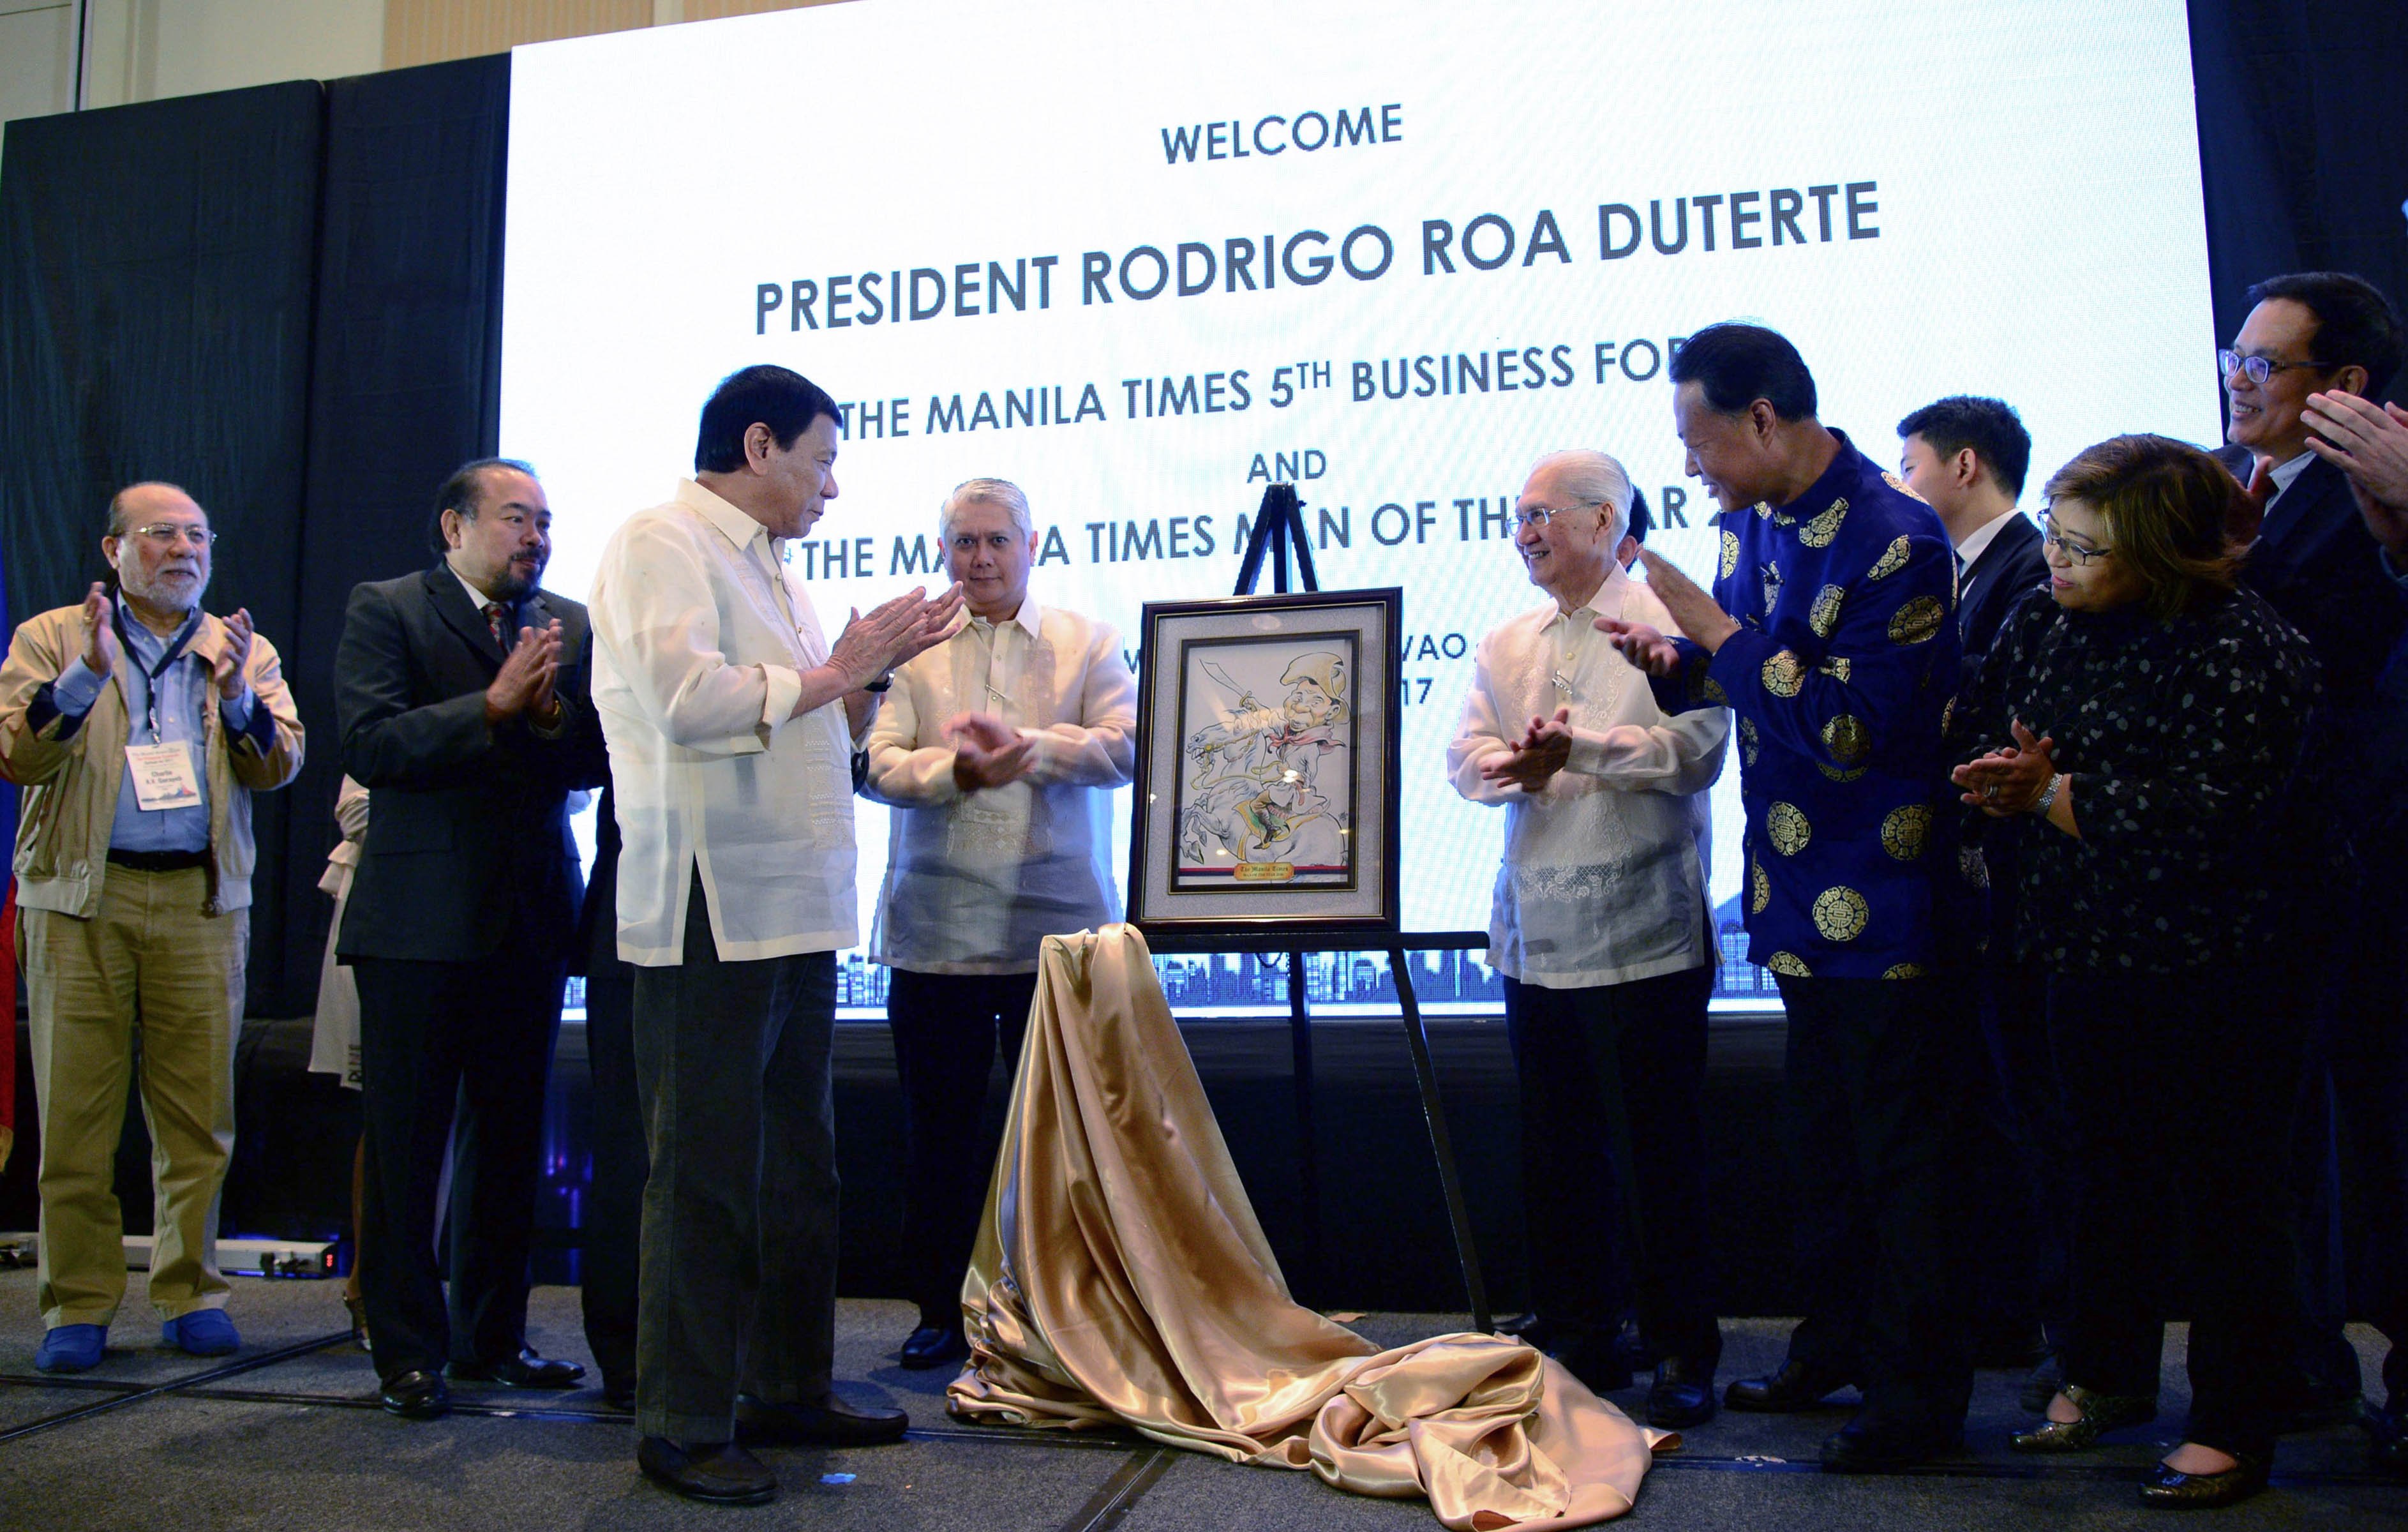 Pres. Duterte is Manila Times 'Man of the Year'